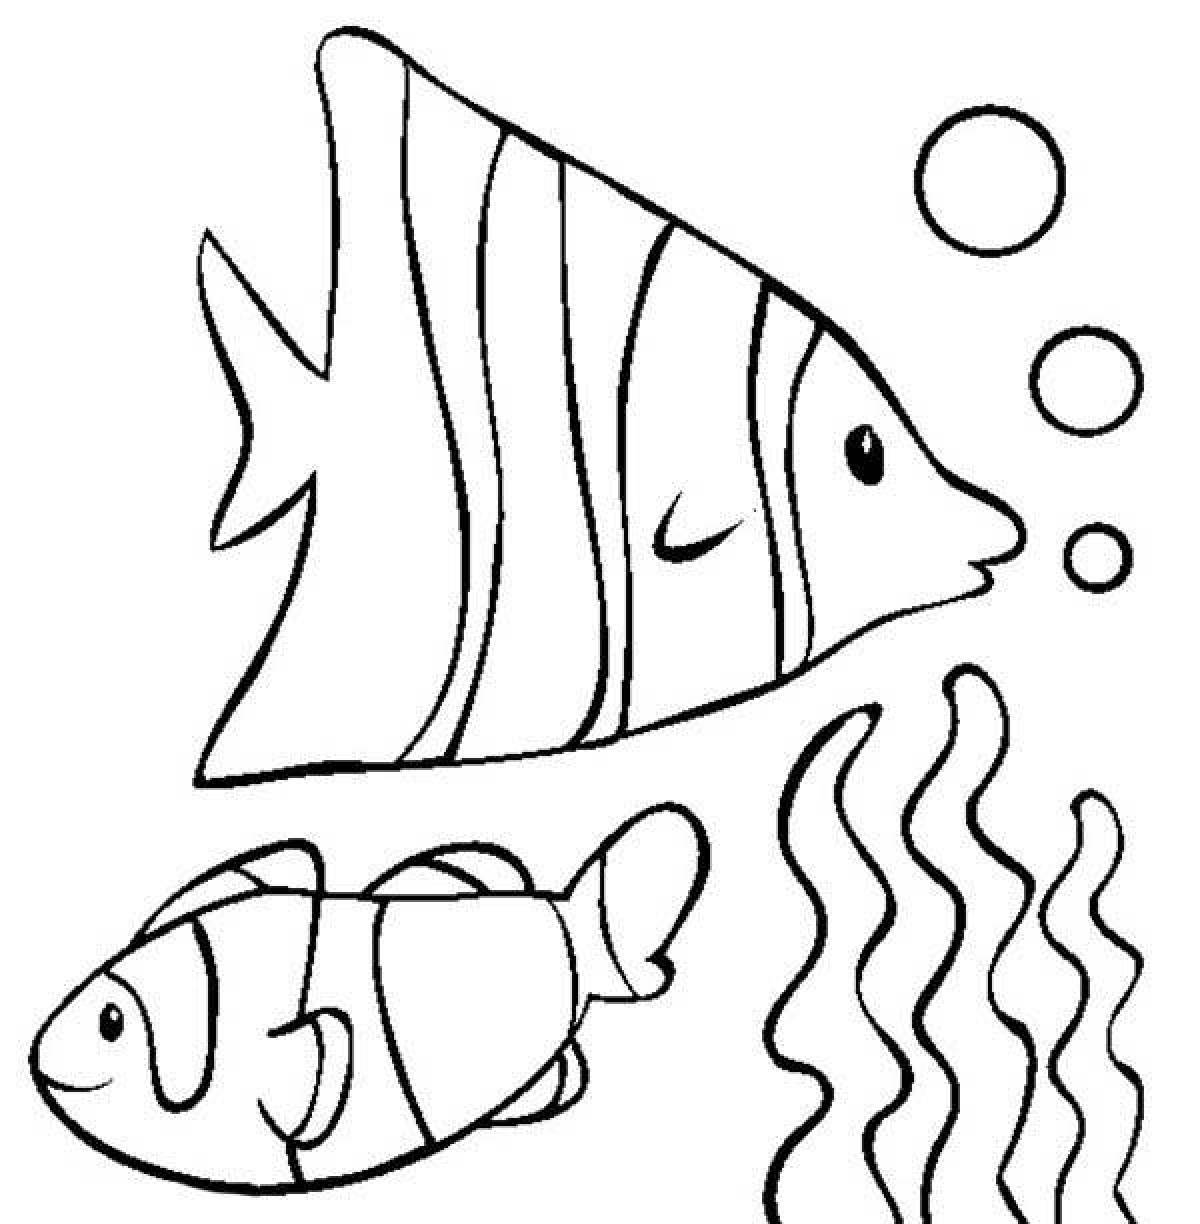 Magic fish coloring book for 4-5 year olds